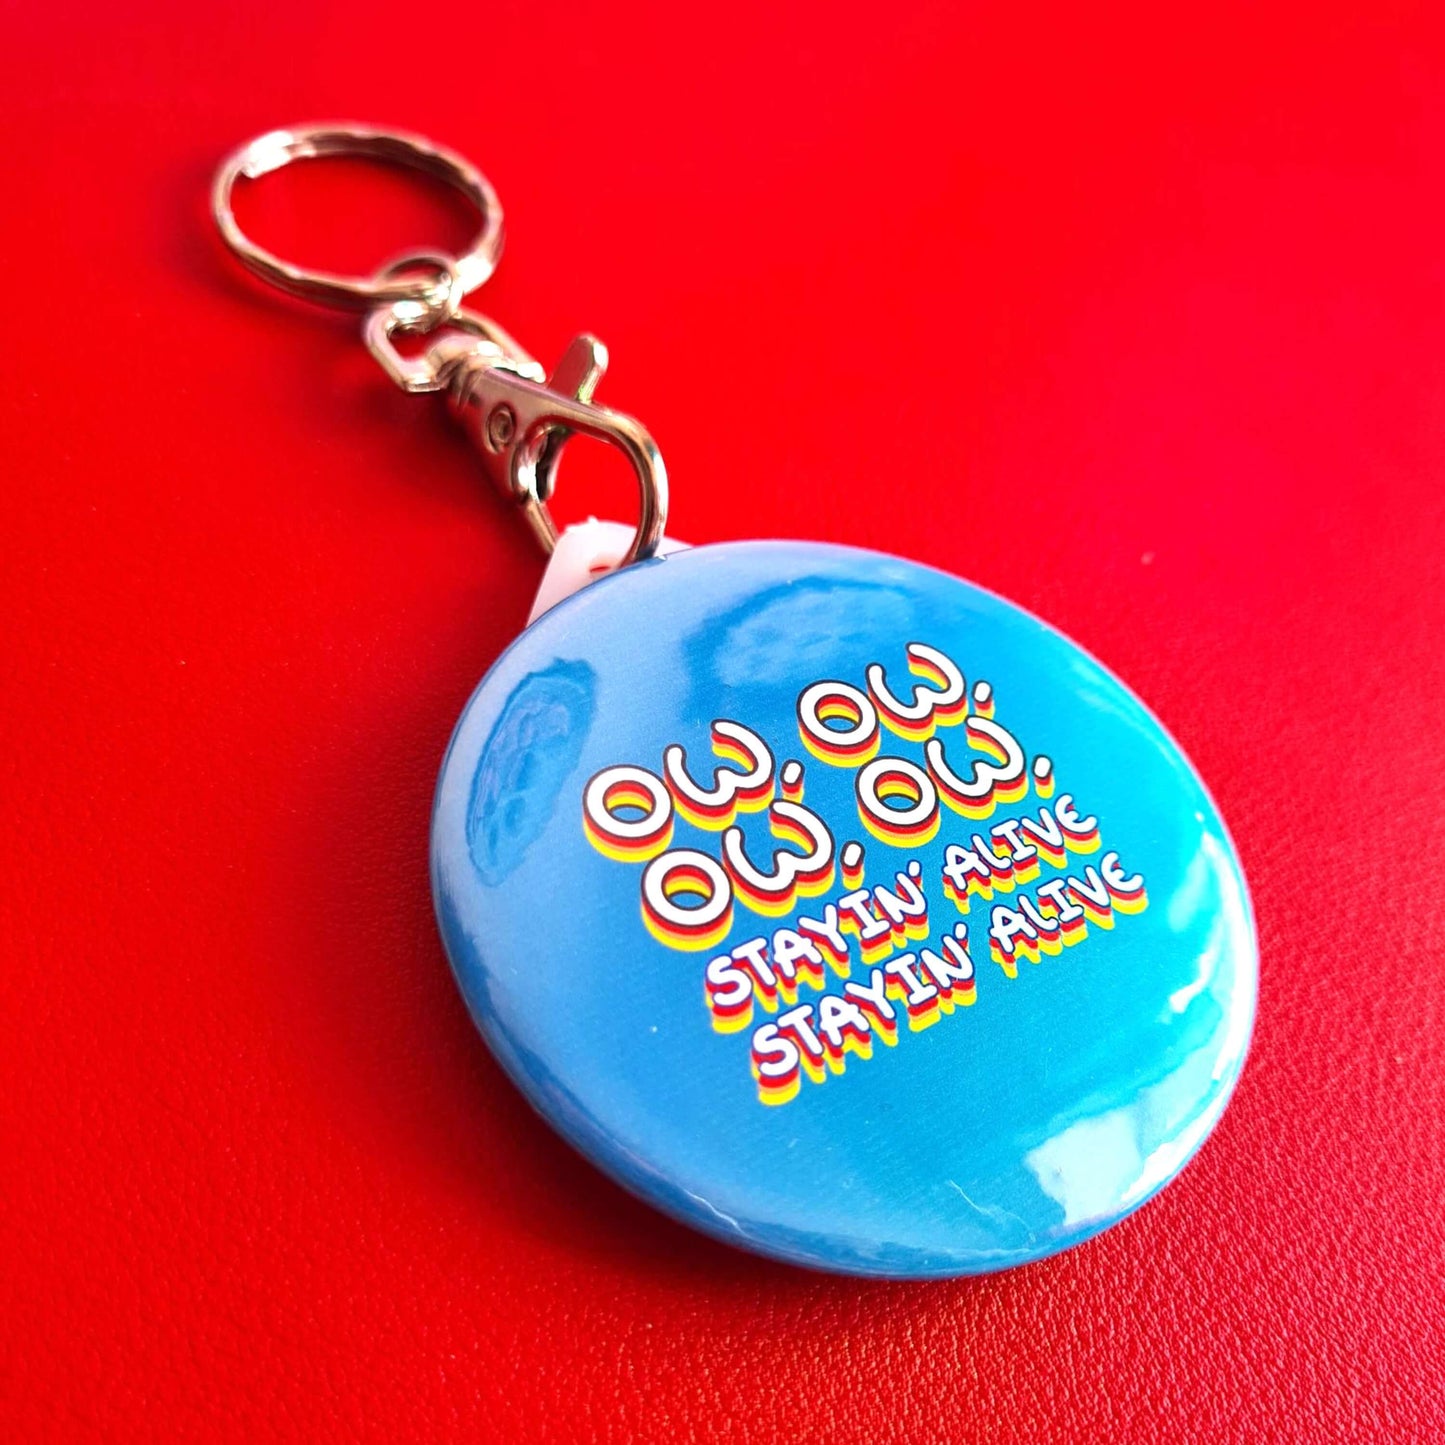 Ow, Ow, Ow, Ow, Staying Alive Keyring